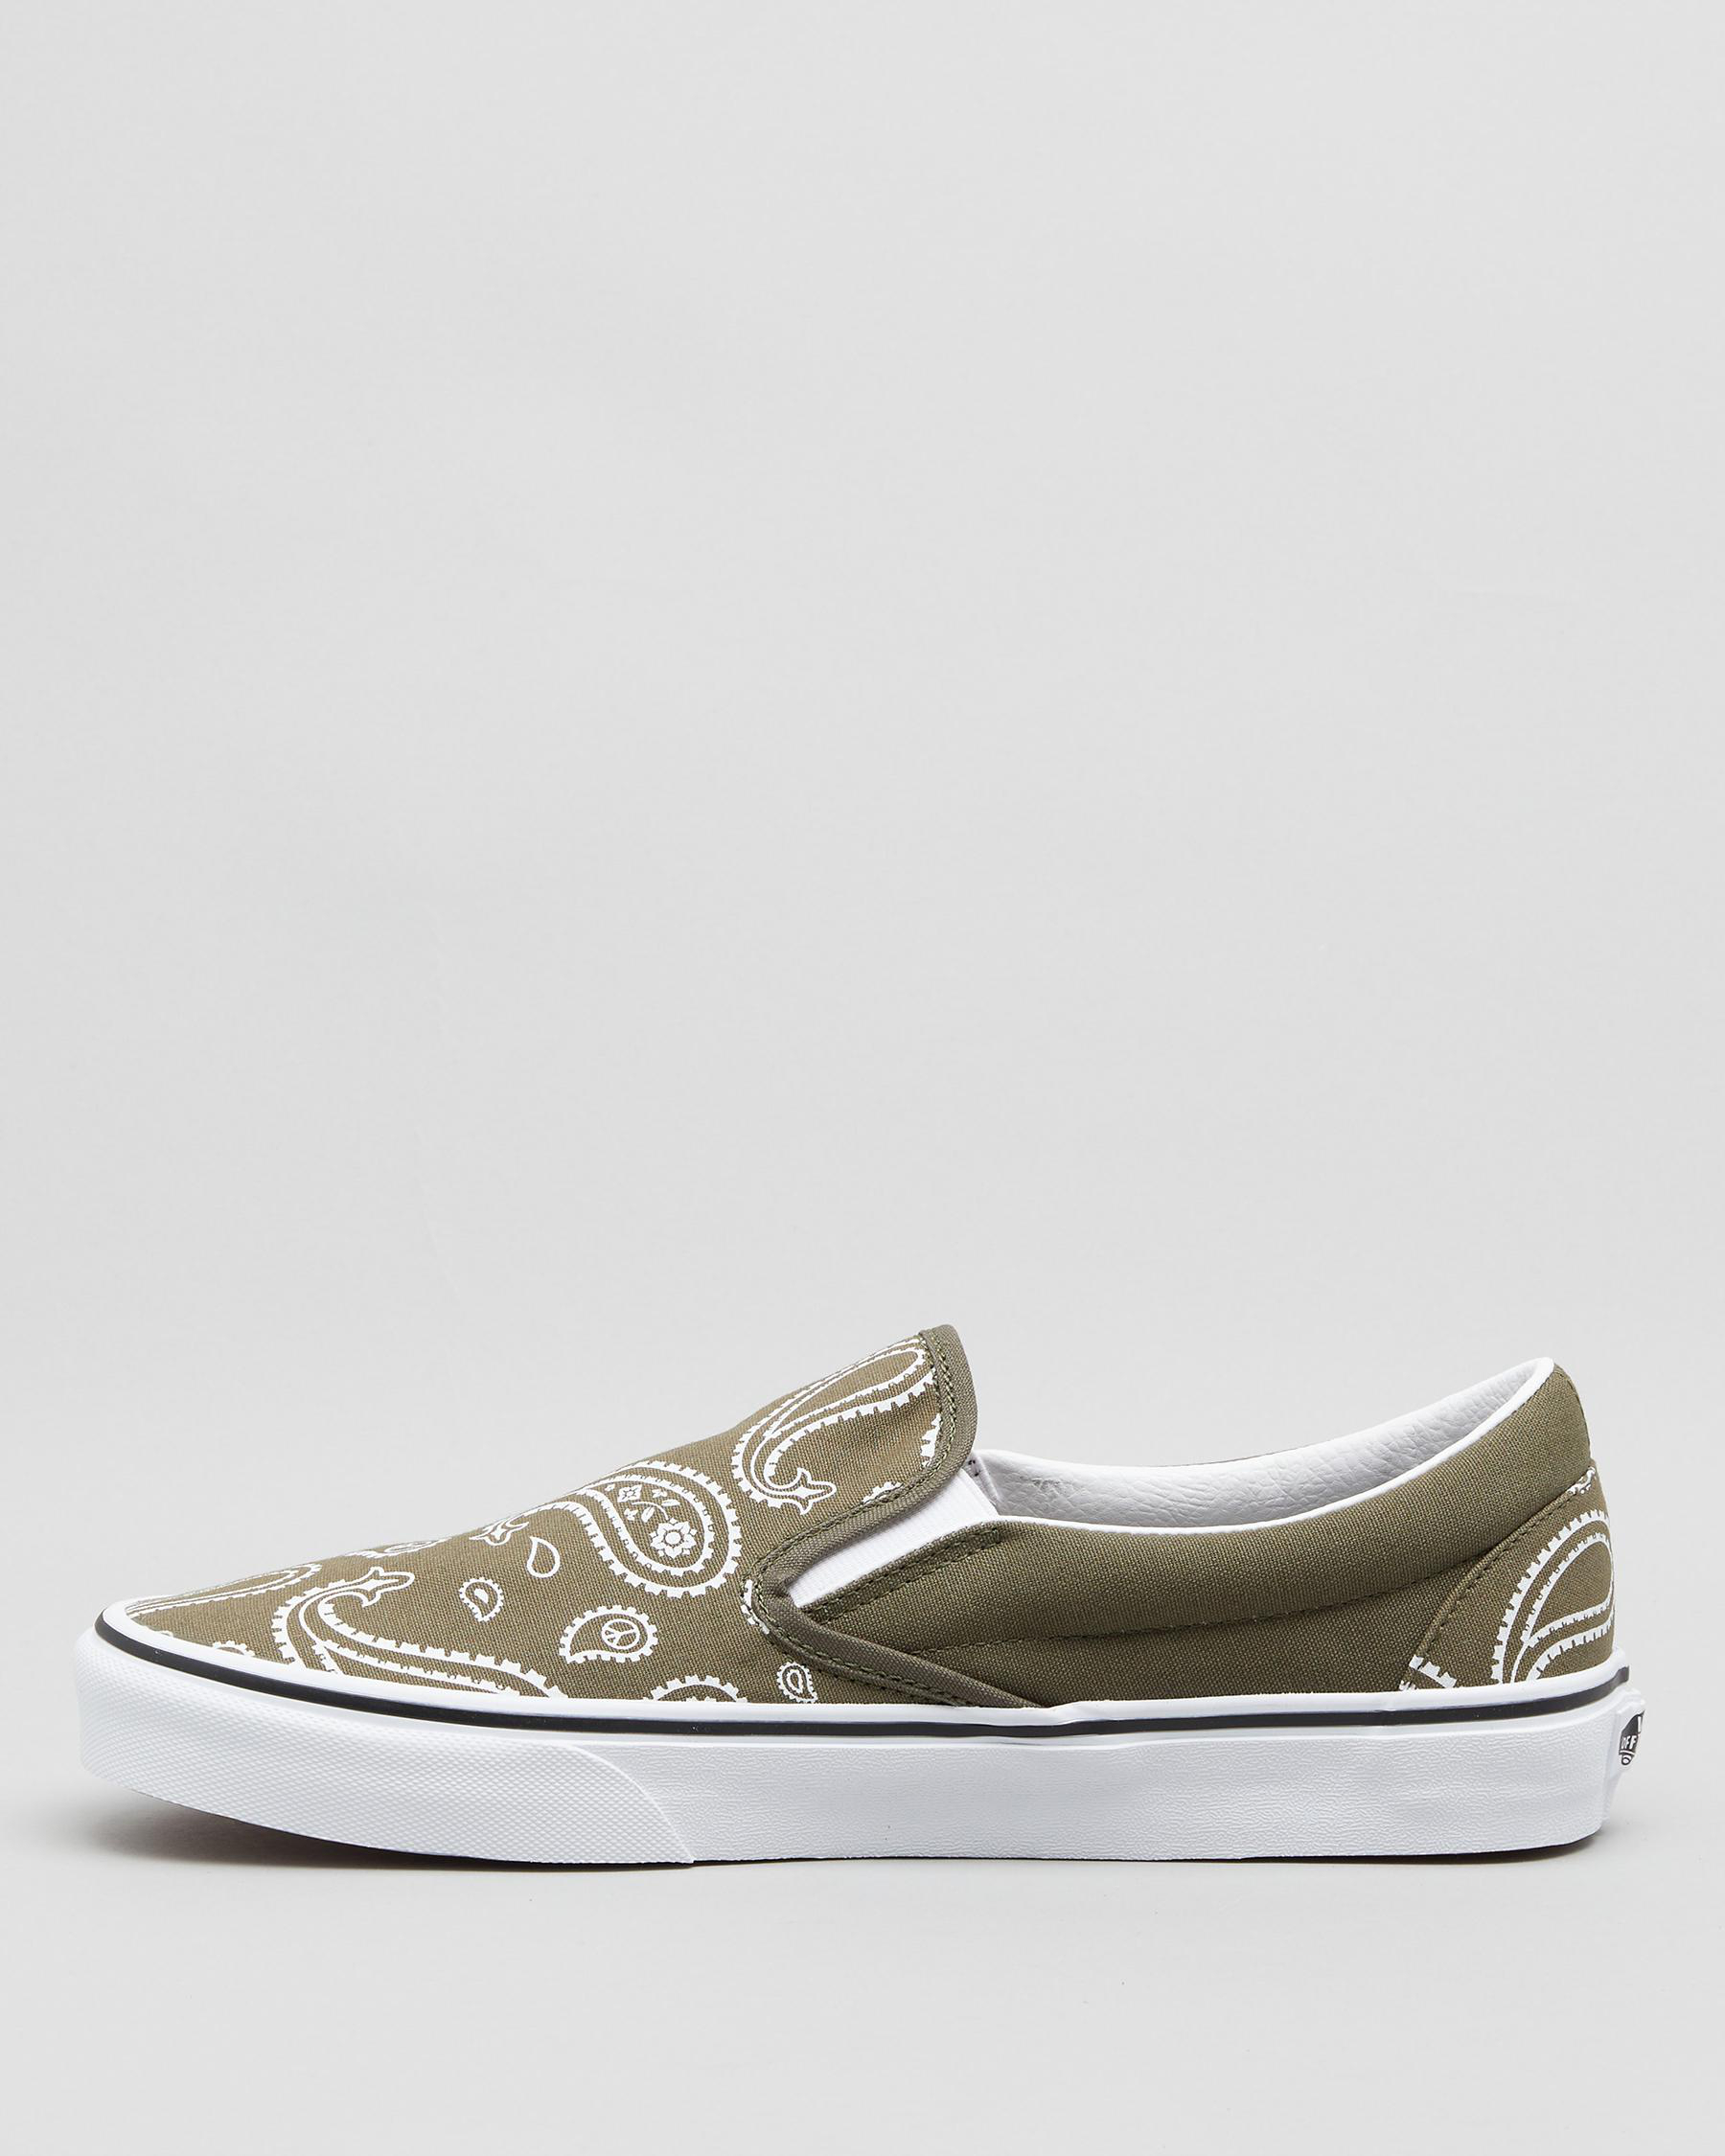 Vans Classic Slip-On Shoes In Grape Leaf/true White - Fast Shipping ...